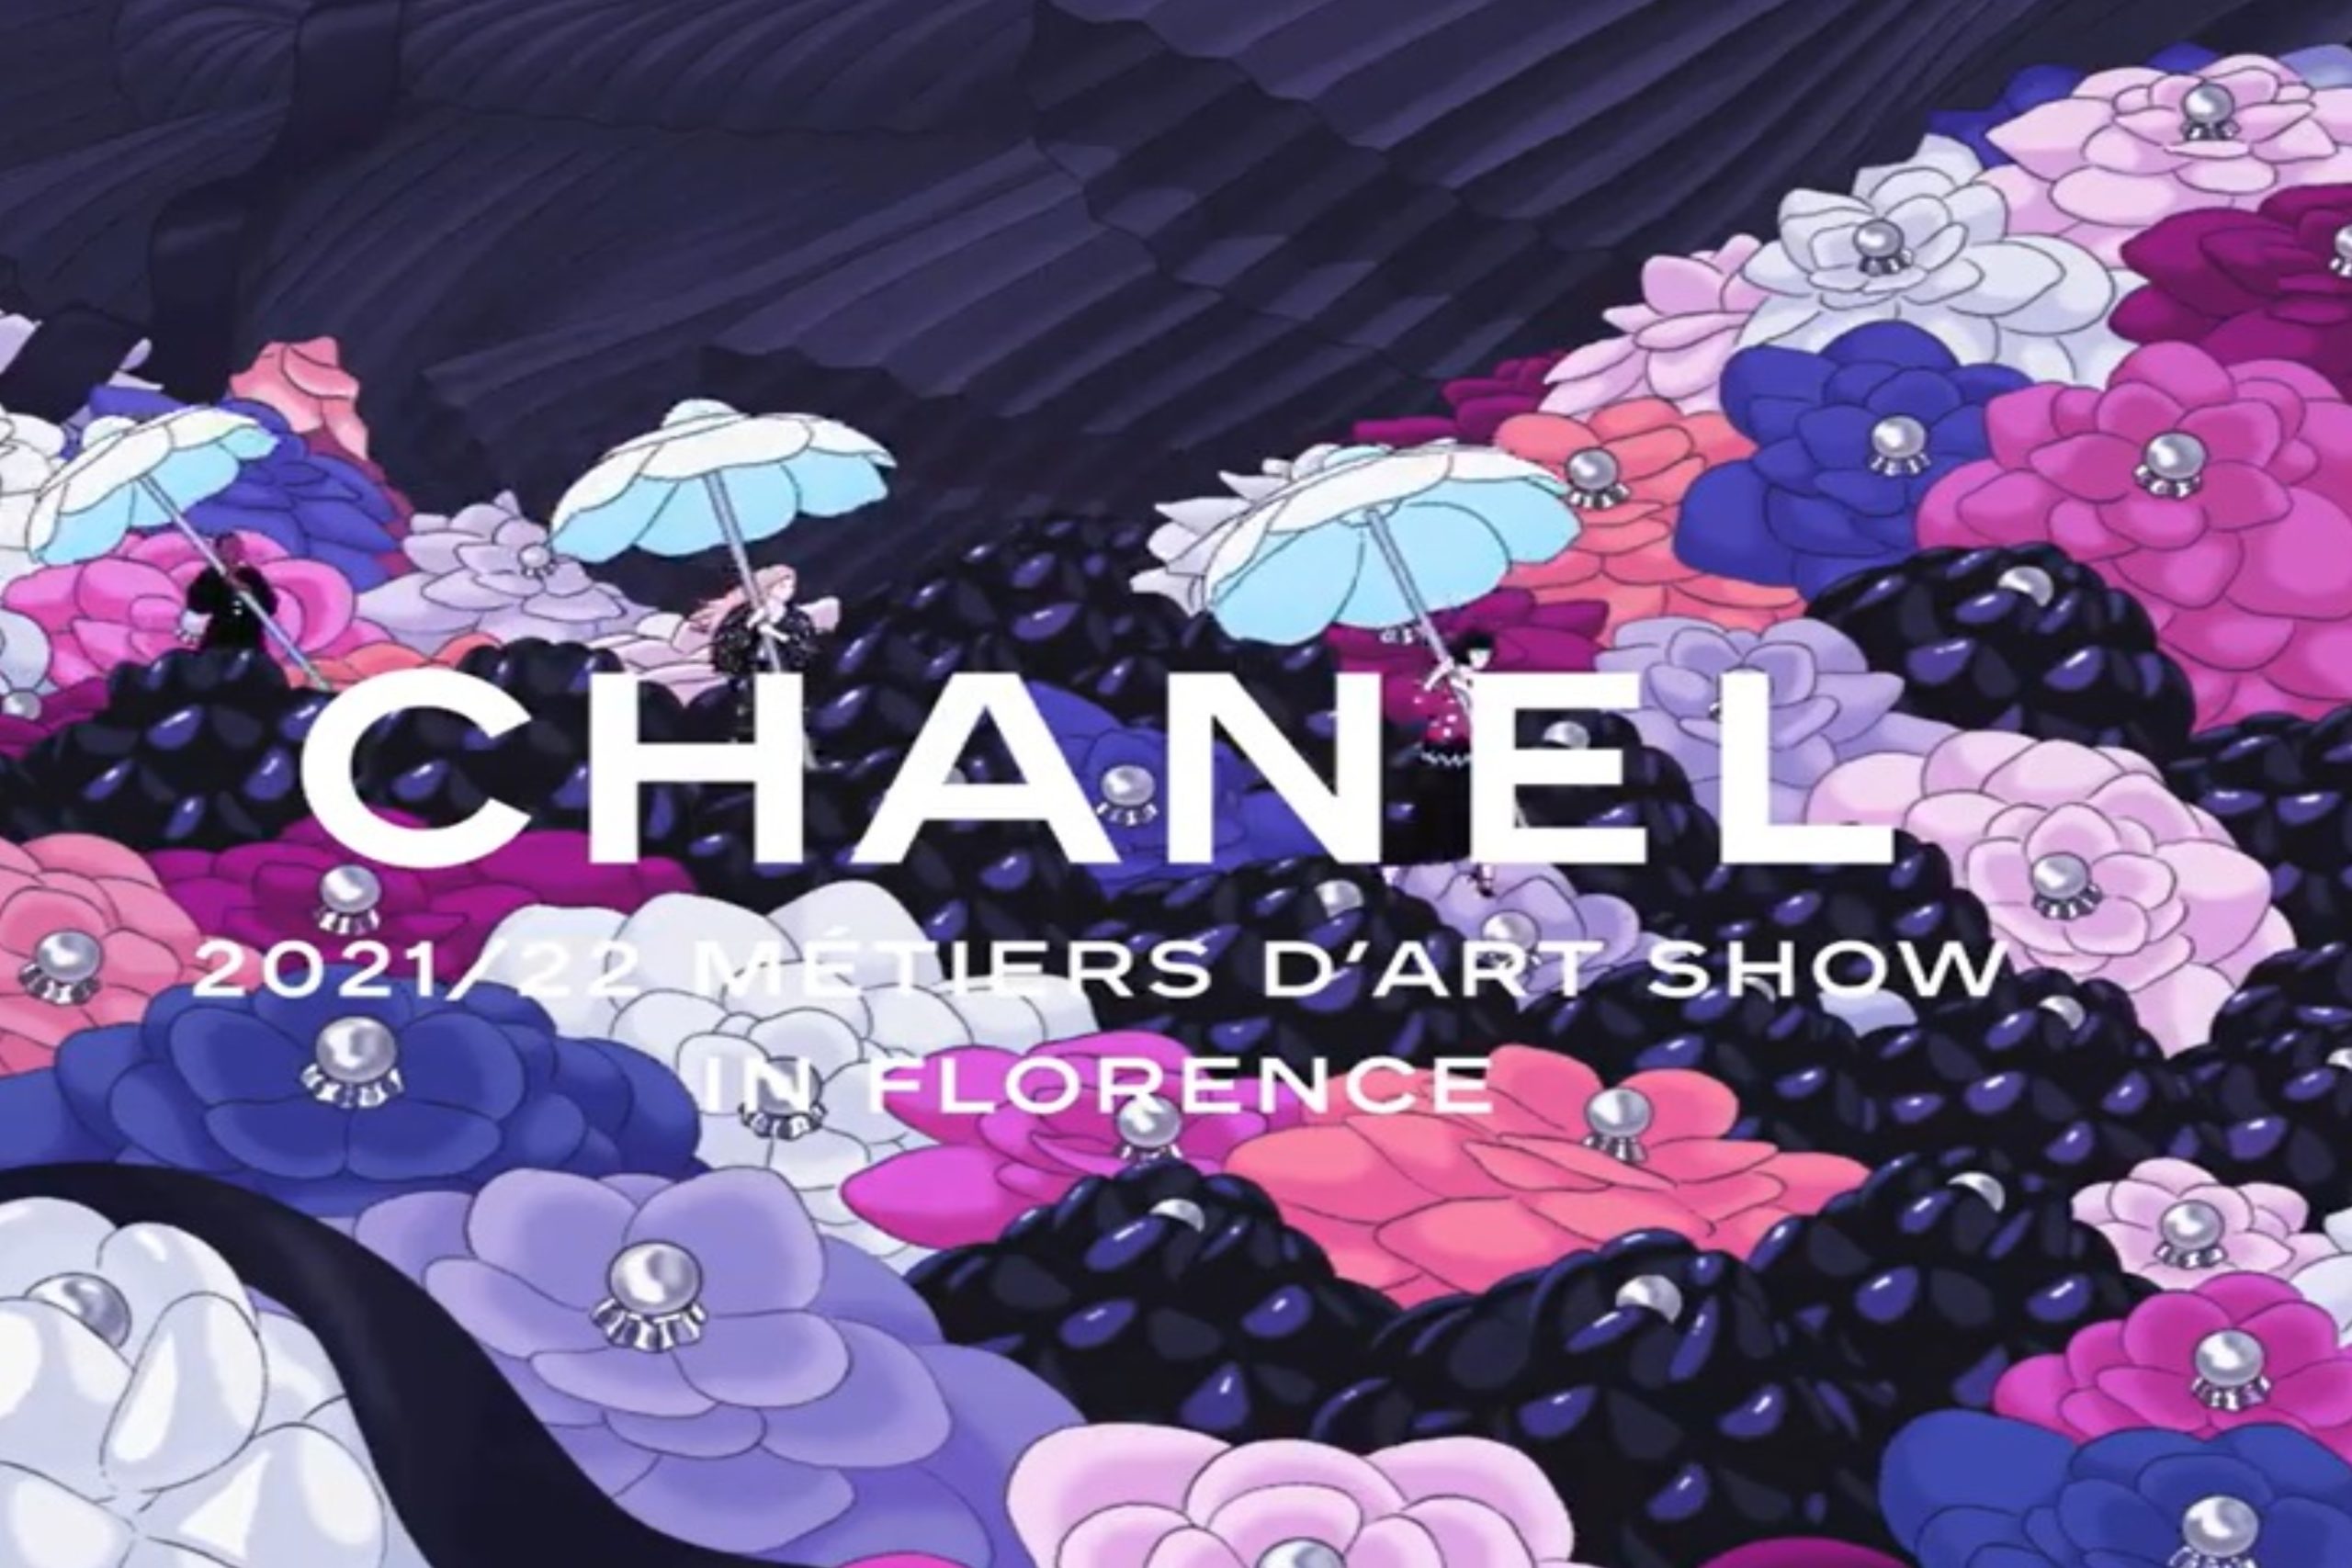 Watch: From Paris to Italy, Metier’s d’art collection of Chanel makes a stopover at Florence